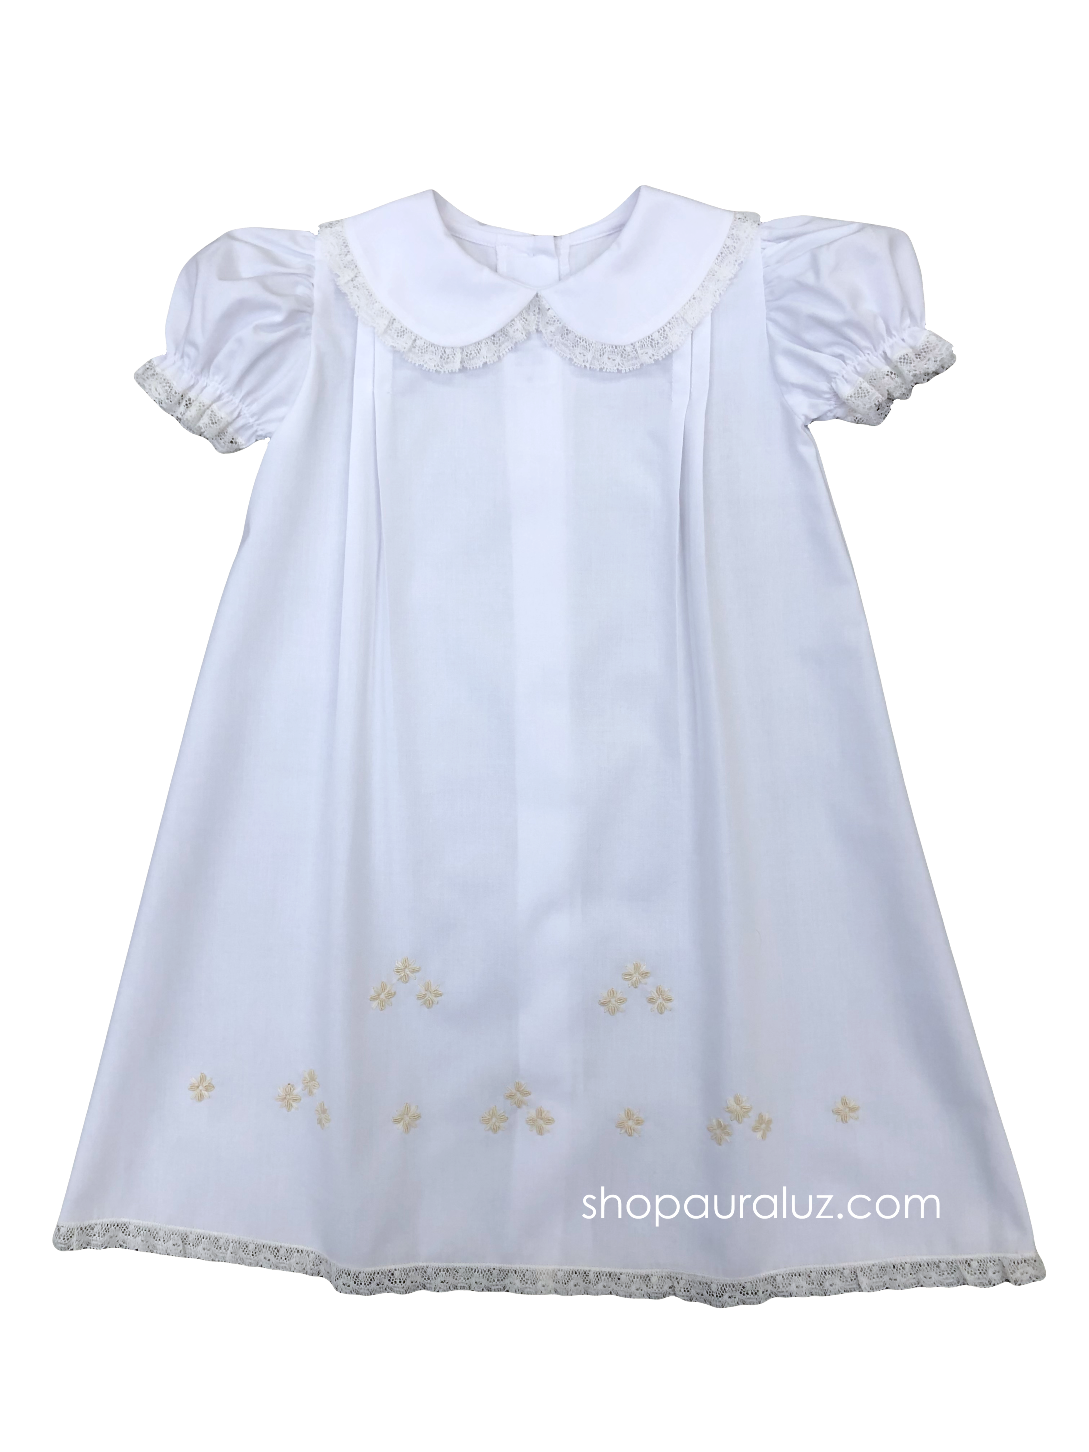 Auraluz Girl Day Gown..White with ecru lace and embroidered rosebuds